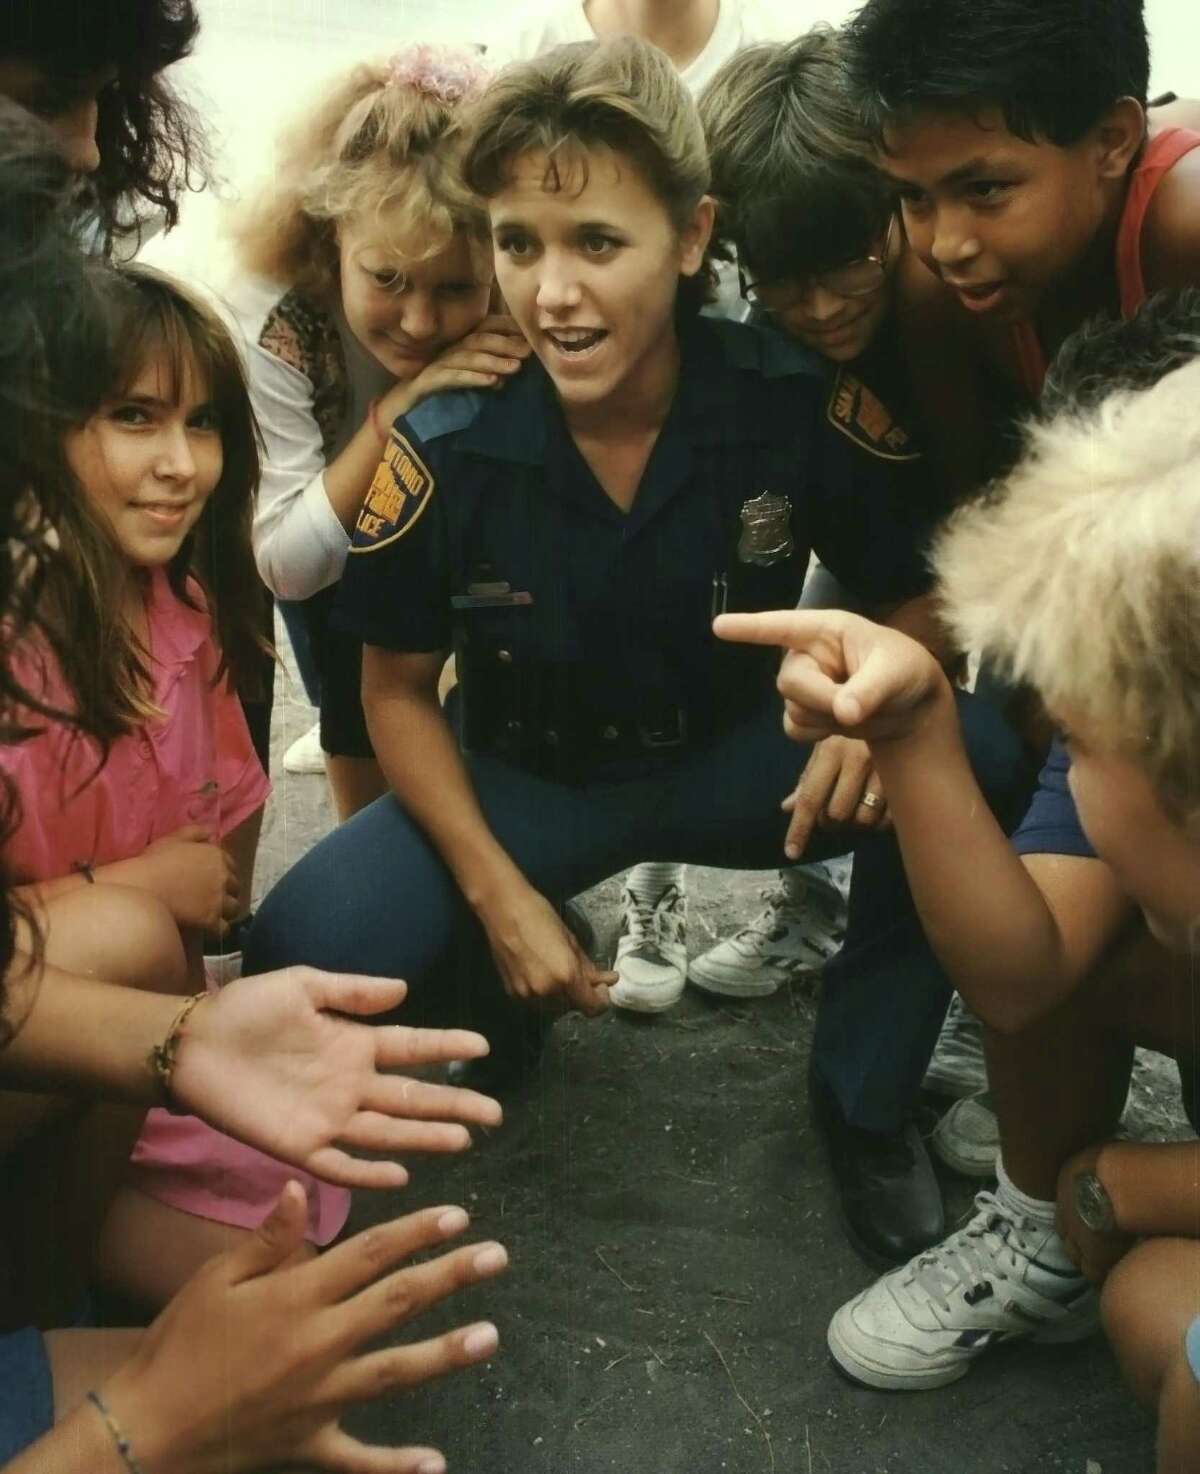 San Antonio police officer Holly Vizcarrondo, then known as Holly Cheatham, with a group of children in the 1990s.